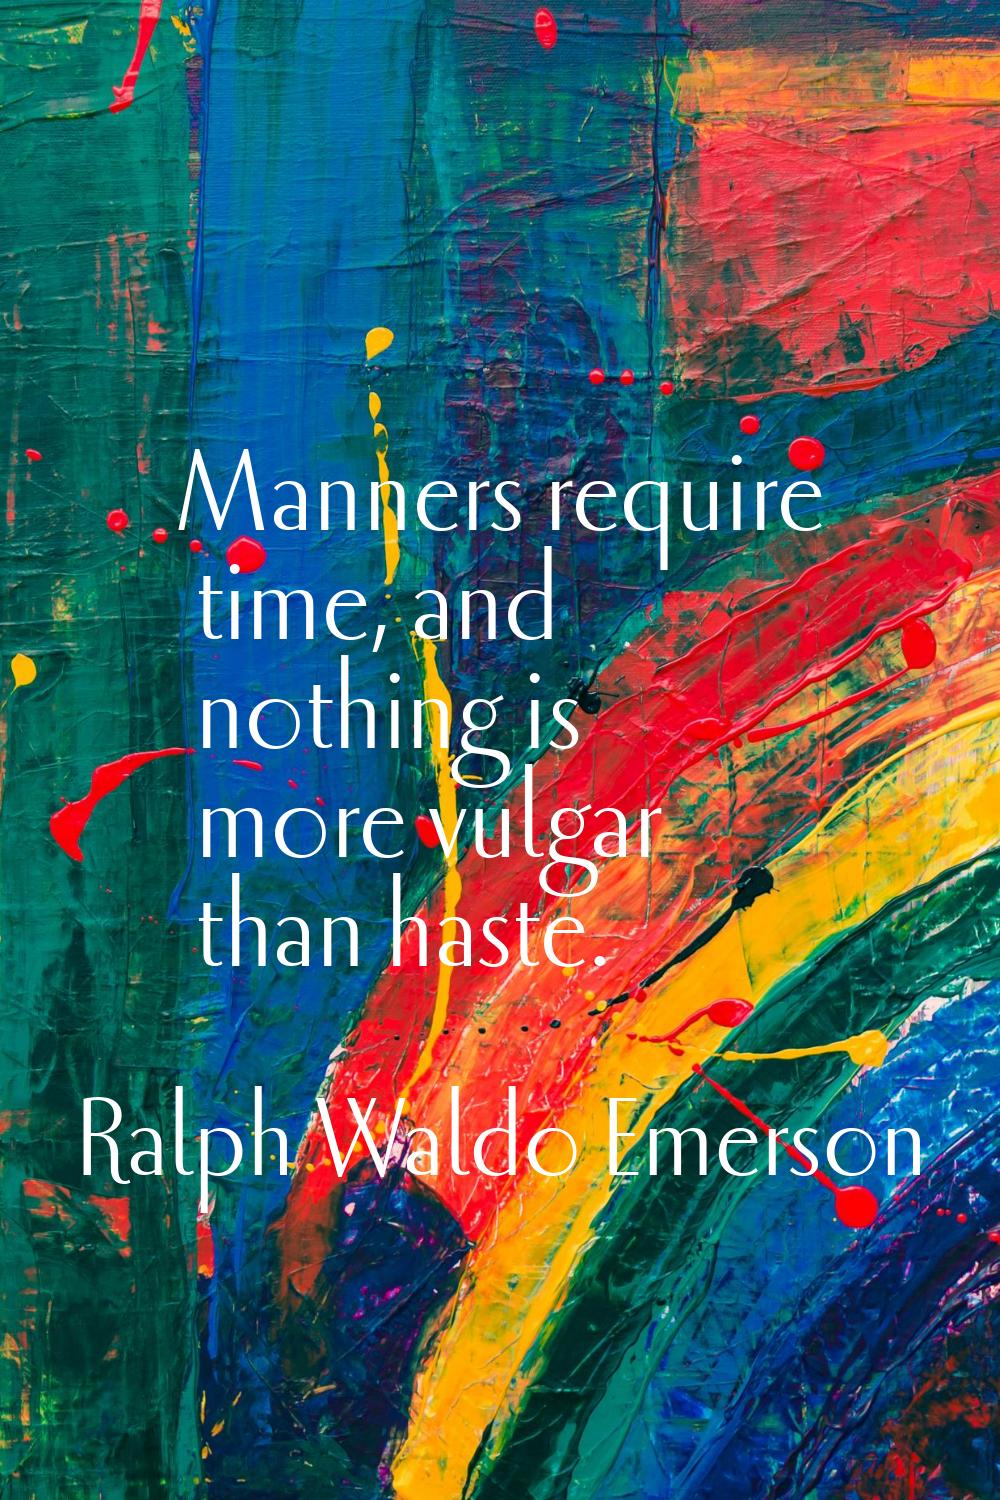 Manners require time, and nothing is more vulgar than haste.